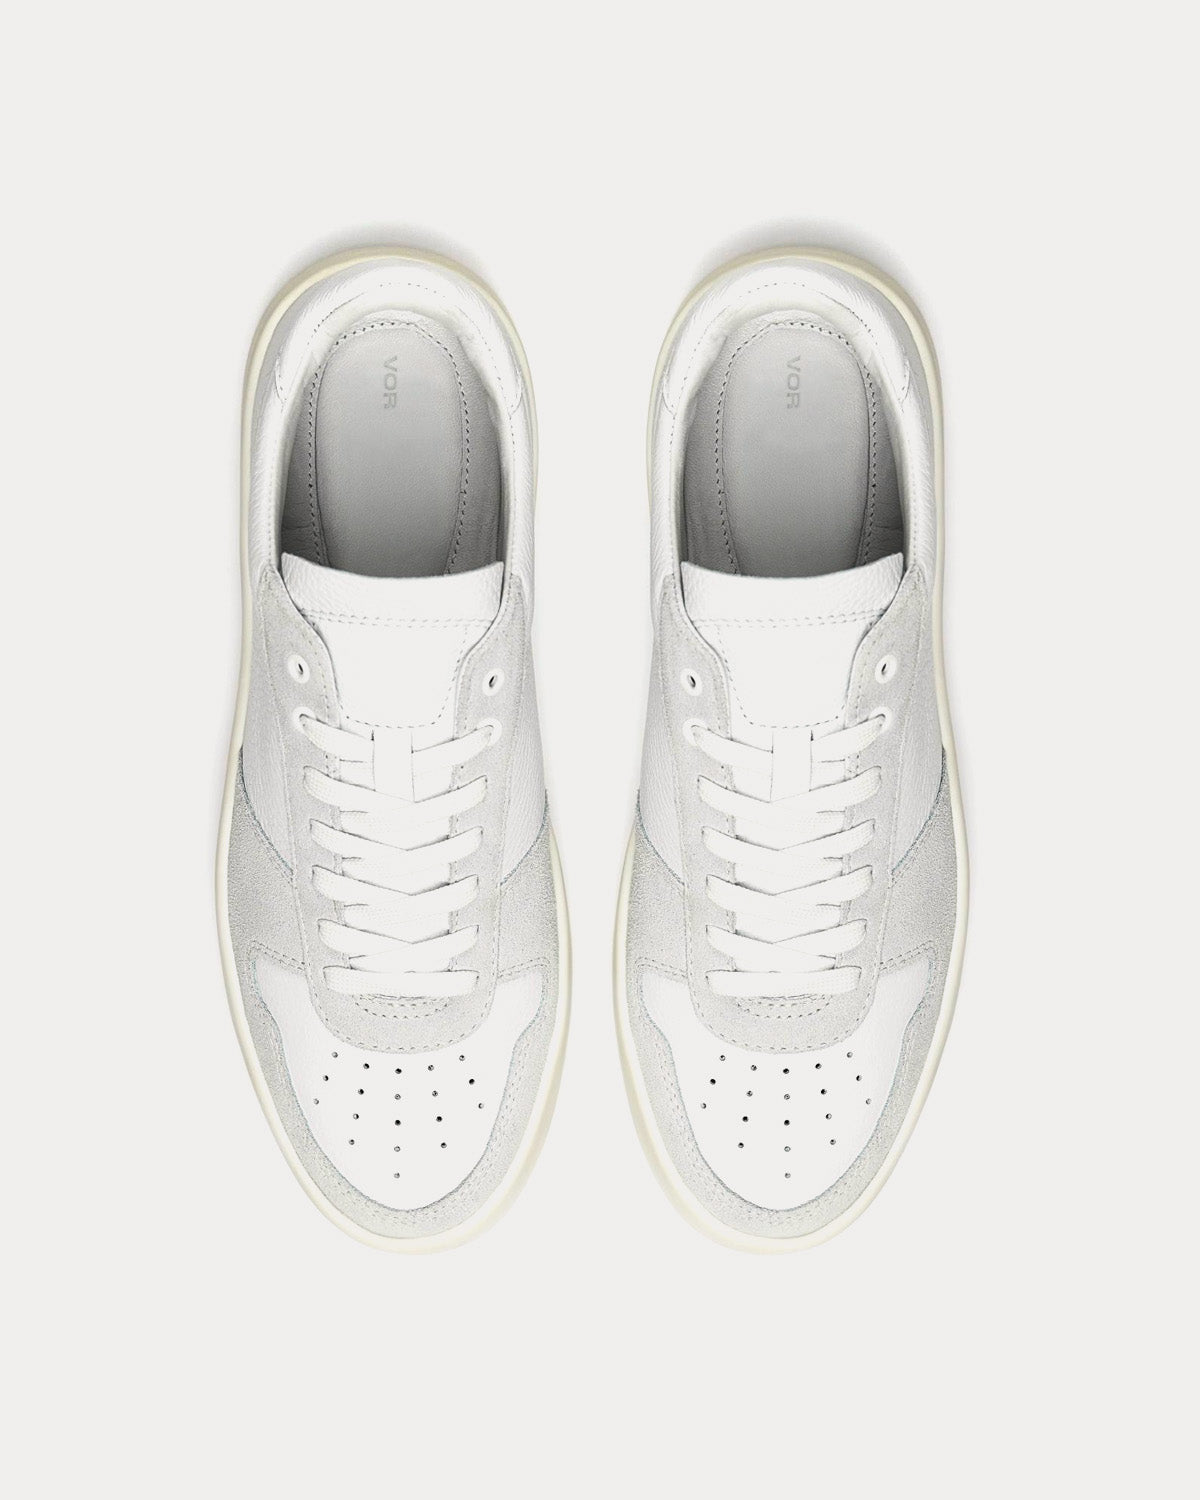 Vor - 5A CHAMPAGNERWEISS White Low Top Sneakers